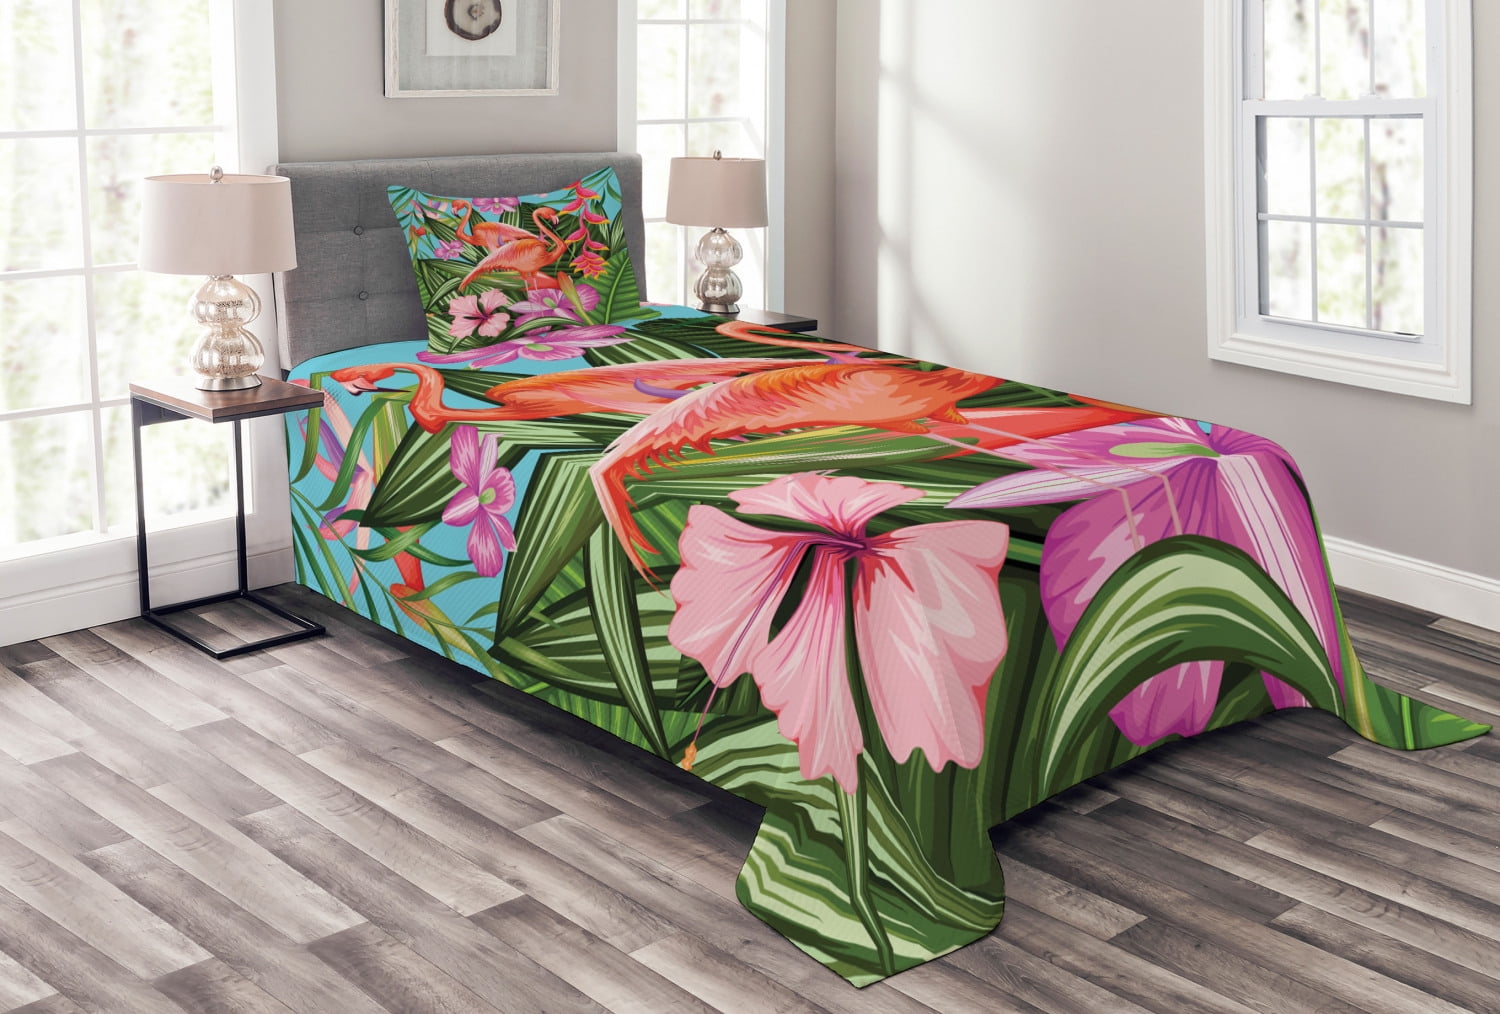 Quilted Coverlet Bedspread Flamingo with Tropical Palm Tree Garden Hibiscus Flower Plant Soft Cozy Microfiber Throw Blanket for Bed Couch or Sofa 64 X 88